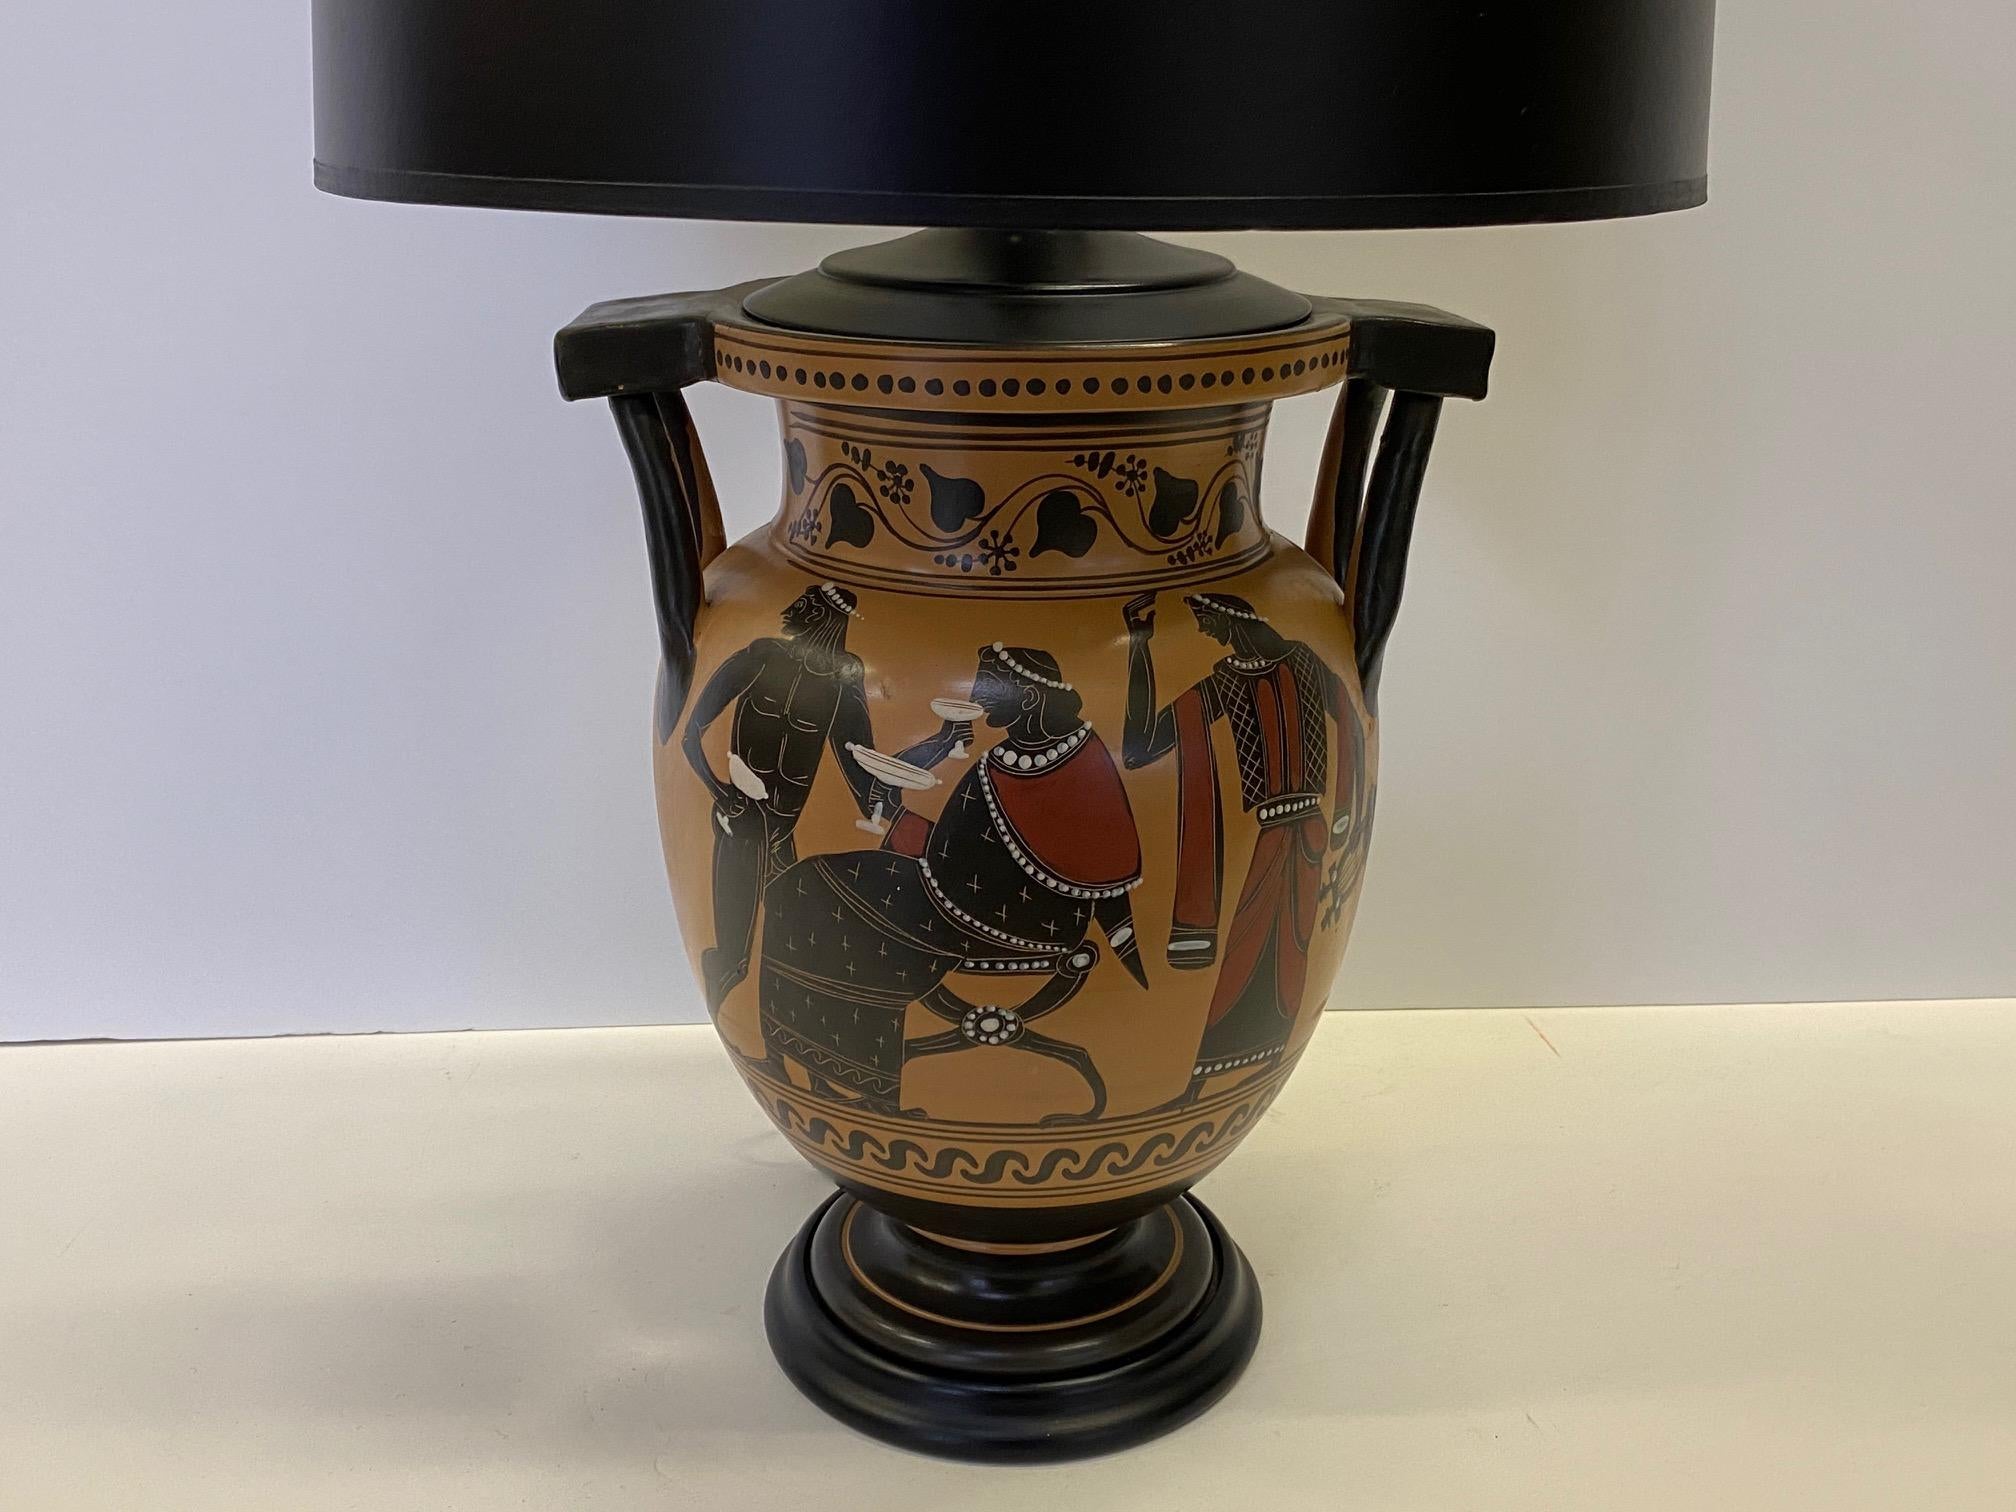 A gorgeous classical Greek style vase having hand painted warm gold background with black and red oxide ancient figures that has been transformed into a striking table lamp with black shade.